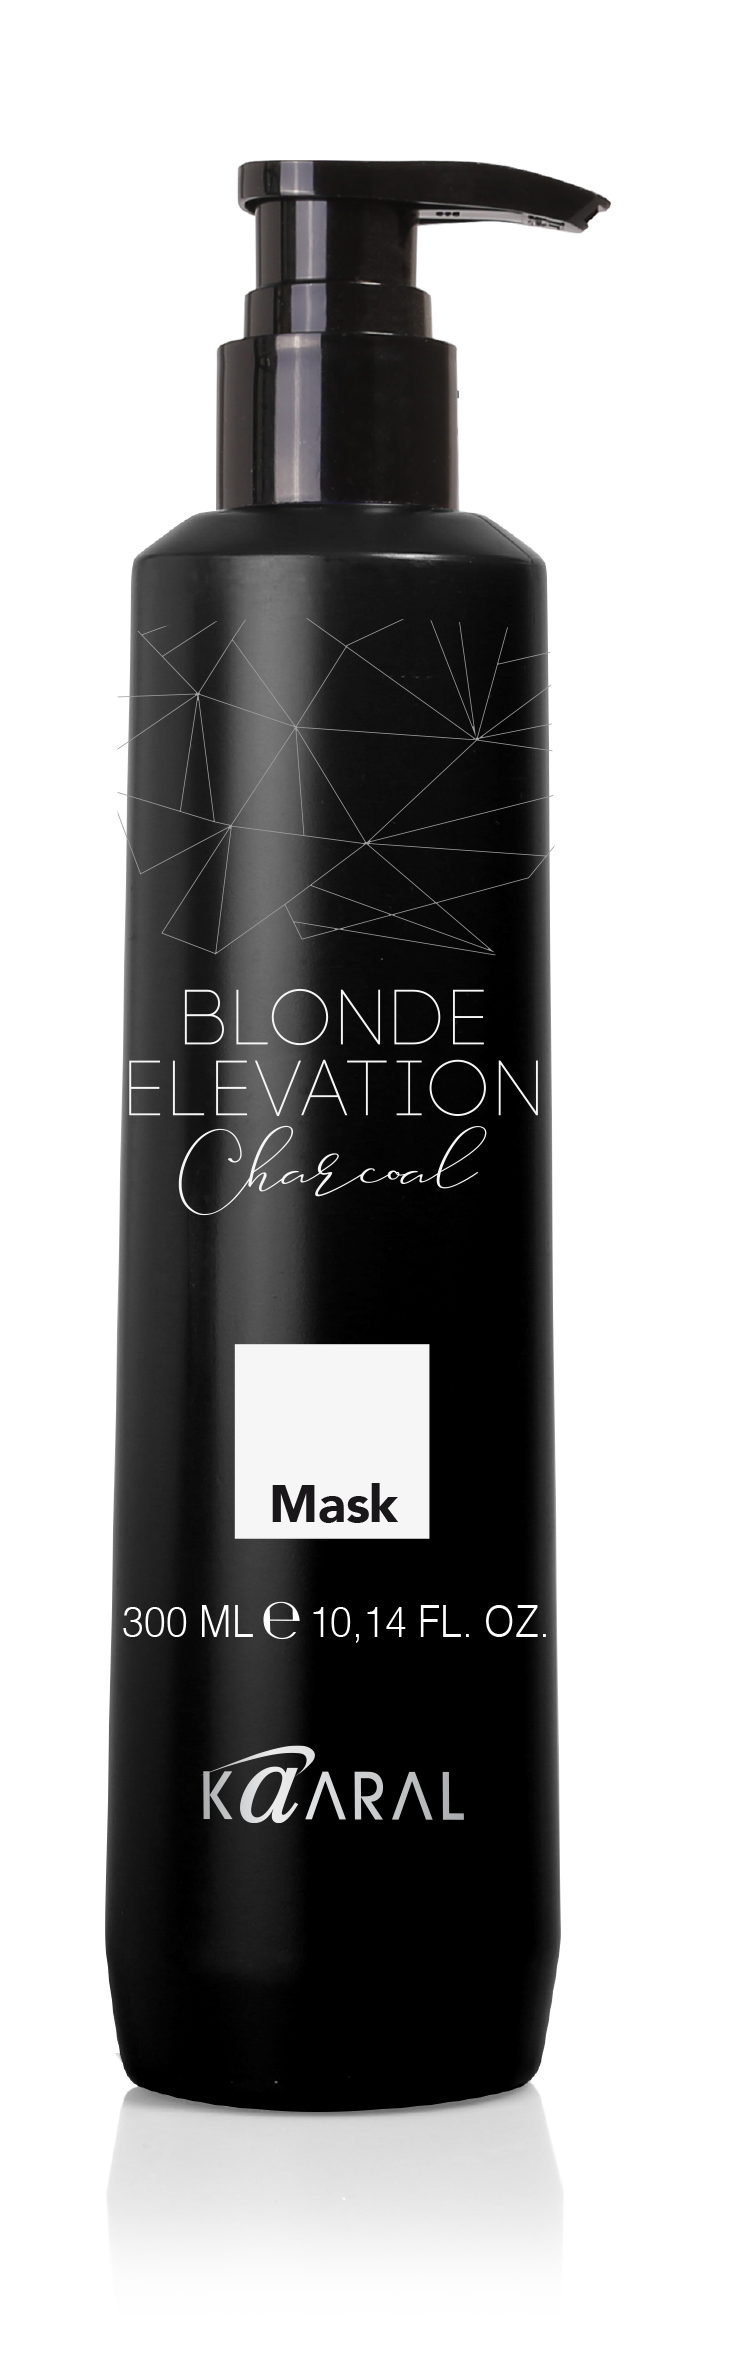 RETAIL BLONDE ELEVATION CHARCOAL MASK